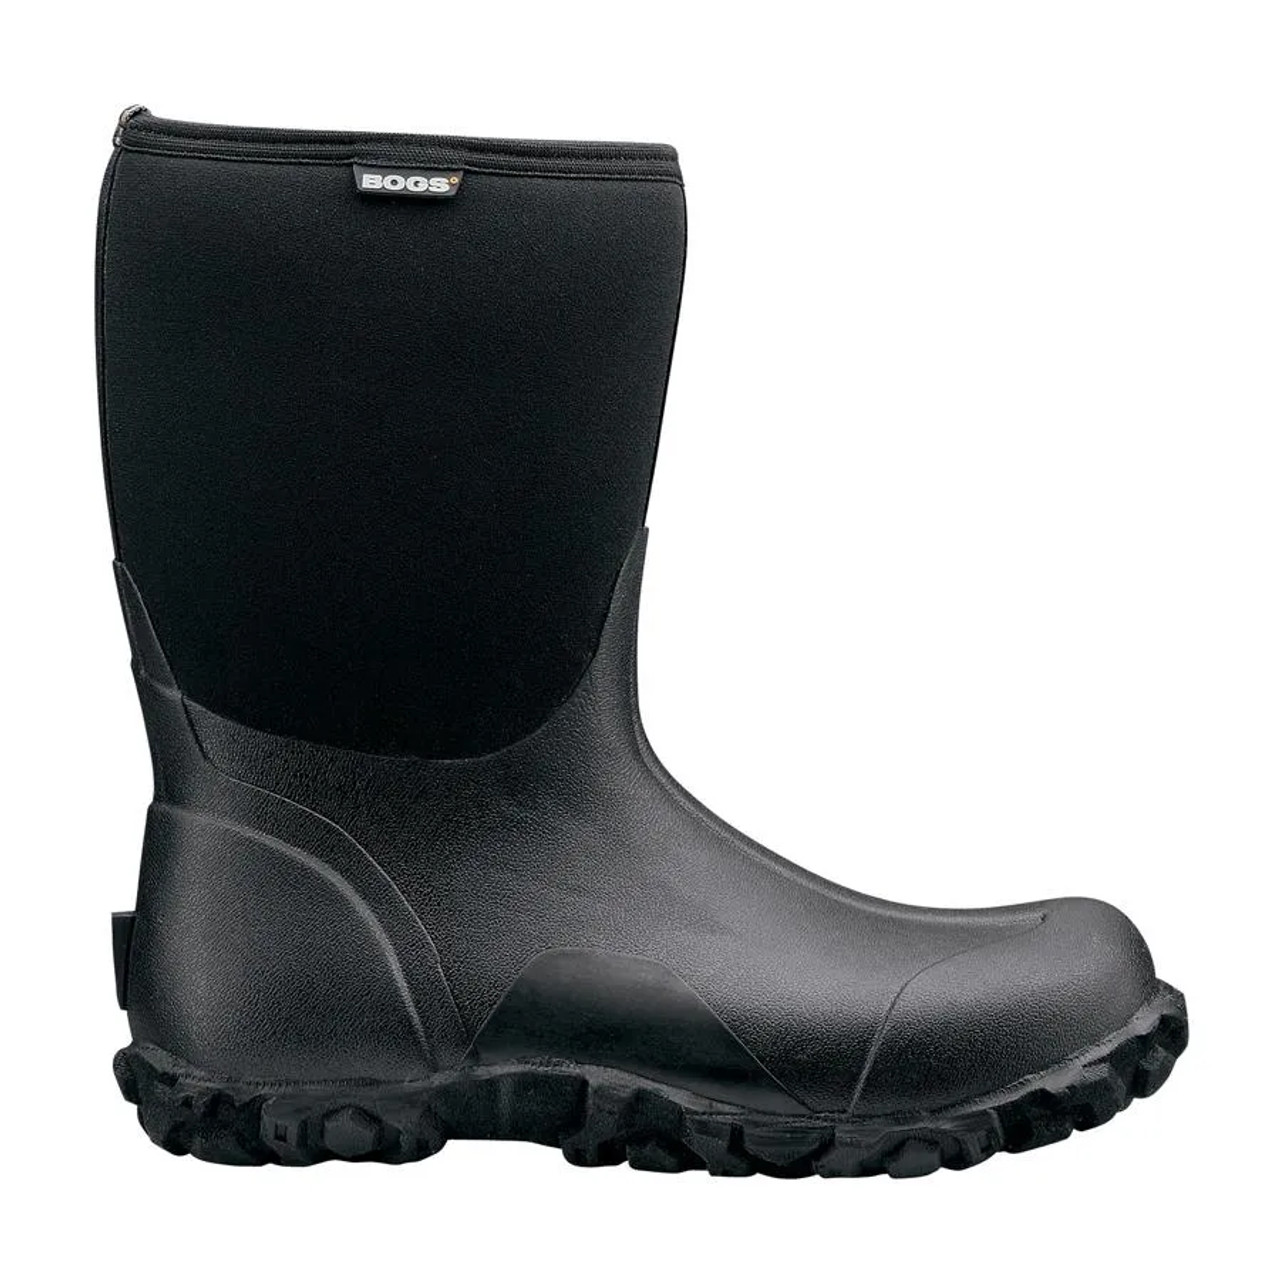 Men's Classic Mid Insulated Work Boots